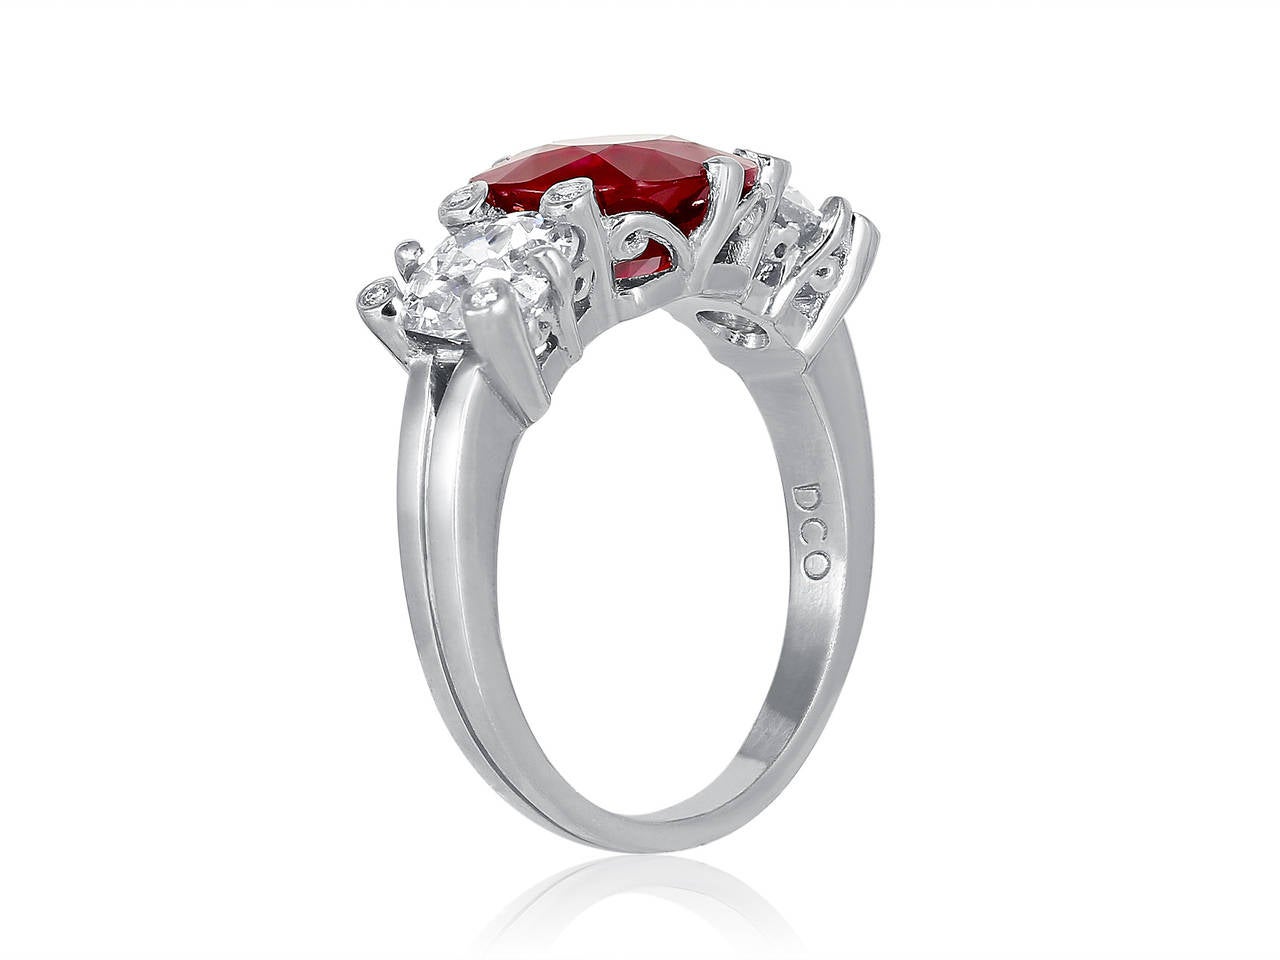 Platinum custom made 3 stone ring consisting of 1 cushion cut Burma ruby weighing 3.07 carats, measuring 8.58 x 8.53P x 4.49mm with AGTA certificate #98022509, the center stone is flanked by 2 old european cut diamond having a total weight of 1.80